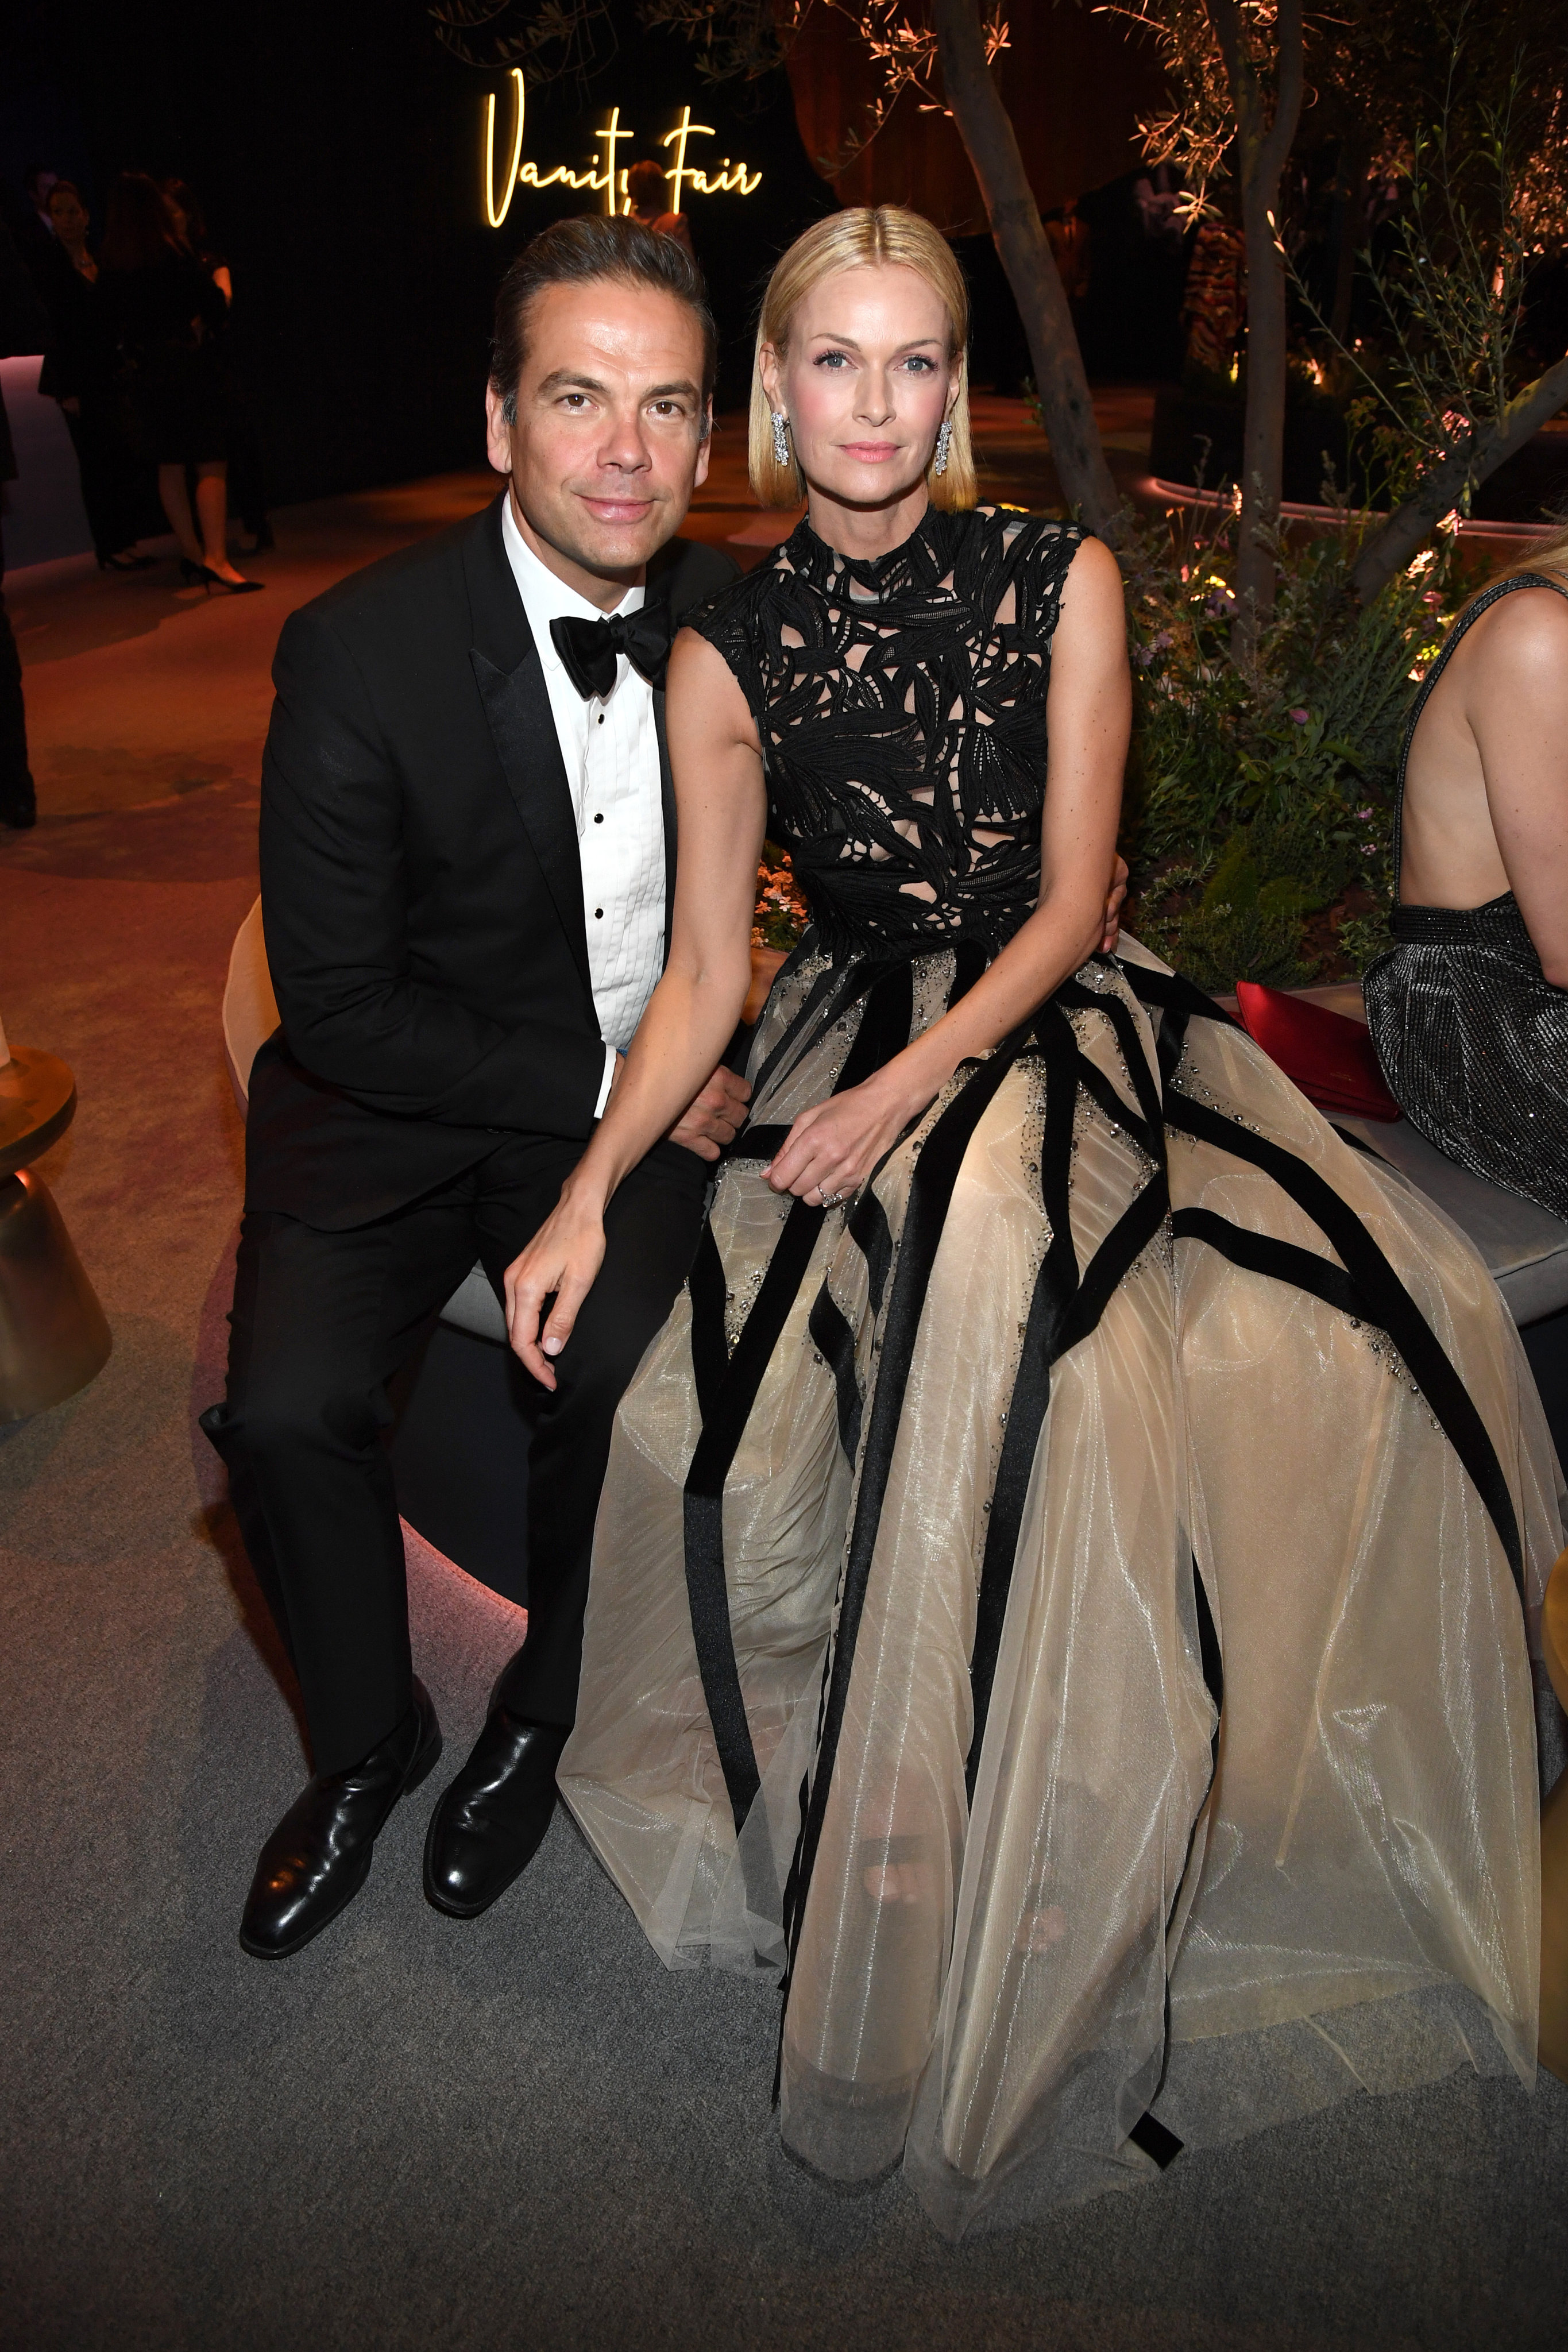 Lachlan Murdoch and Sarah Murdoch have been married for 25 years. Photo: VF20/WireImage